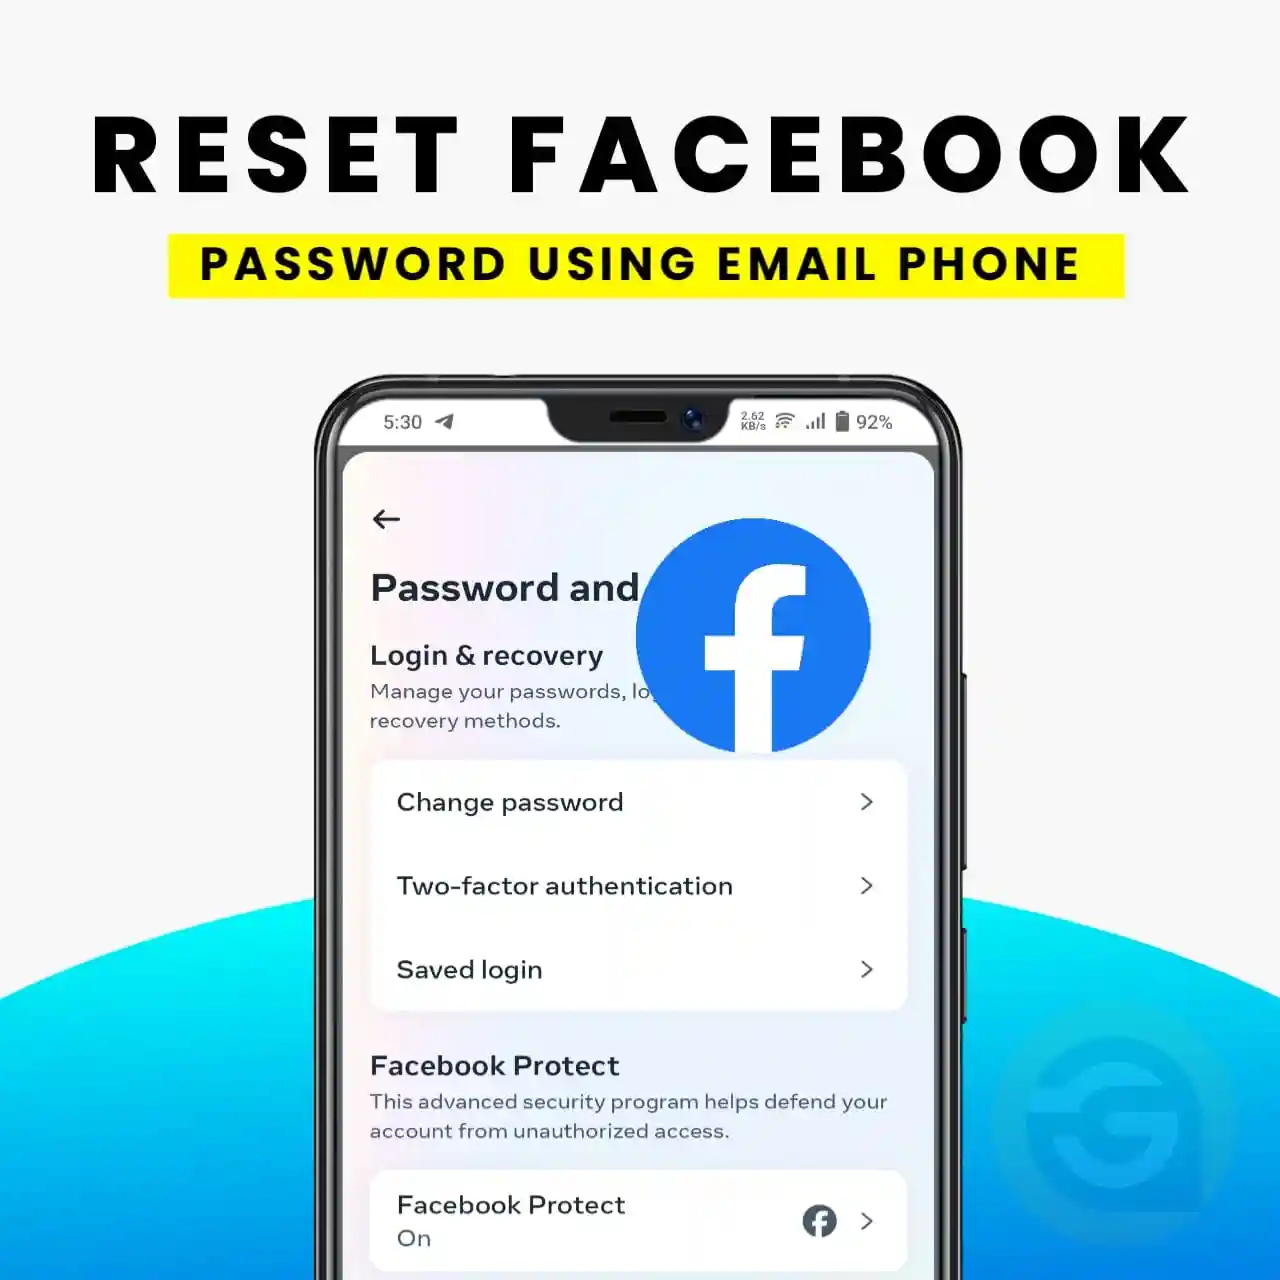 How To Reset Facebook Password Using Email Address or Phone Number